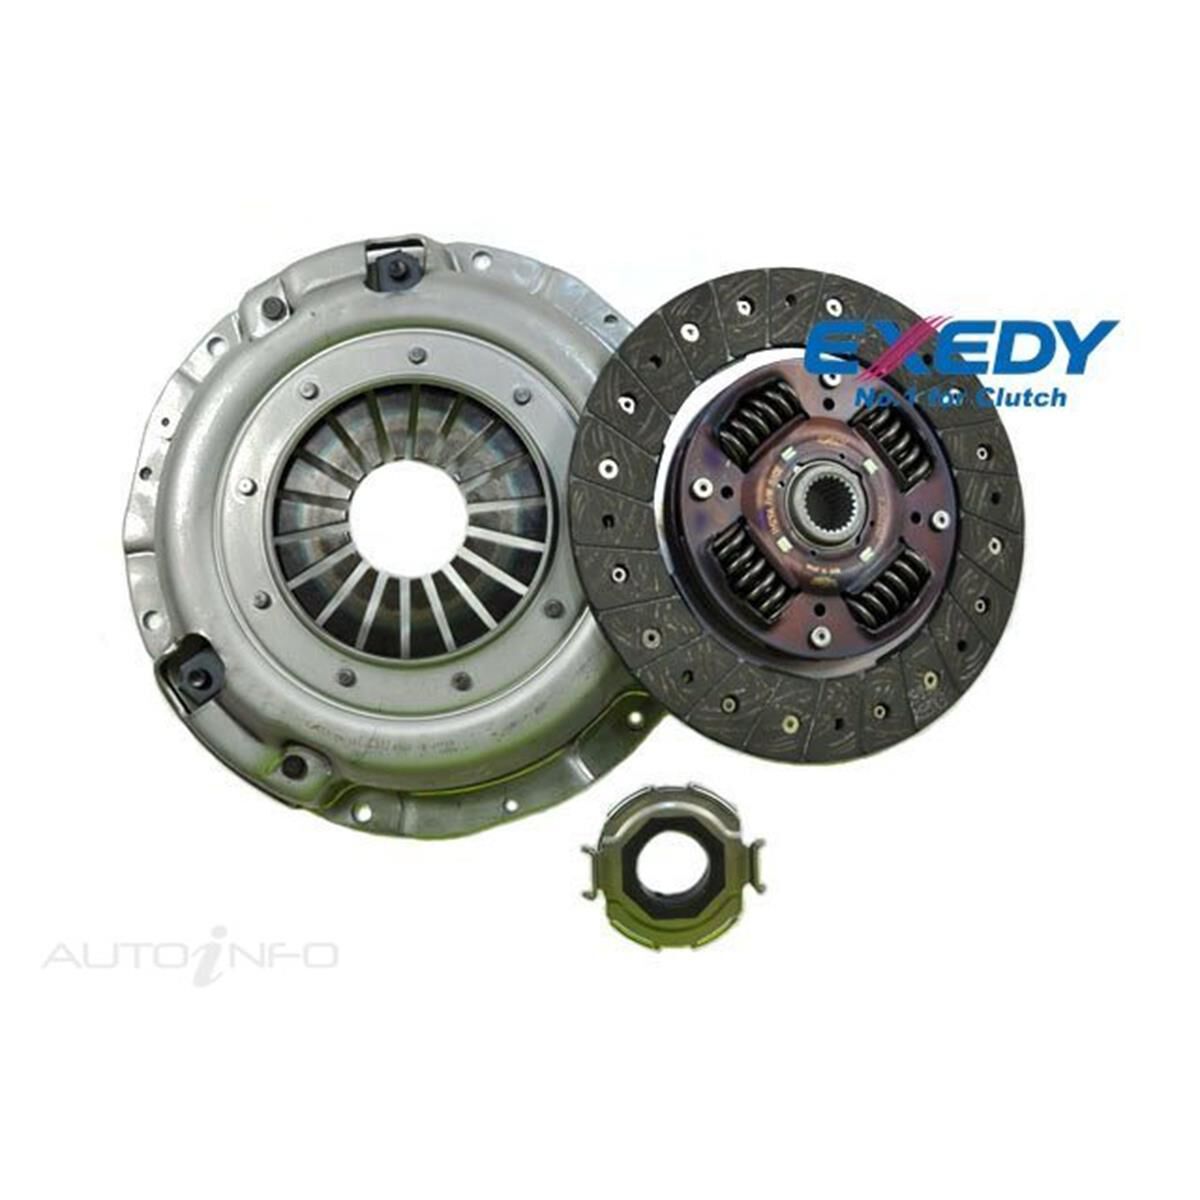 Exedy HYK1004 OEM Replacement Clutch Kit 